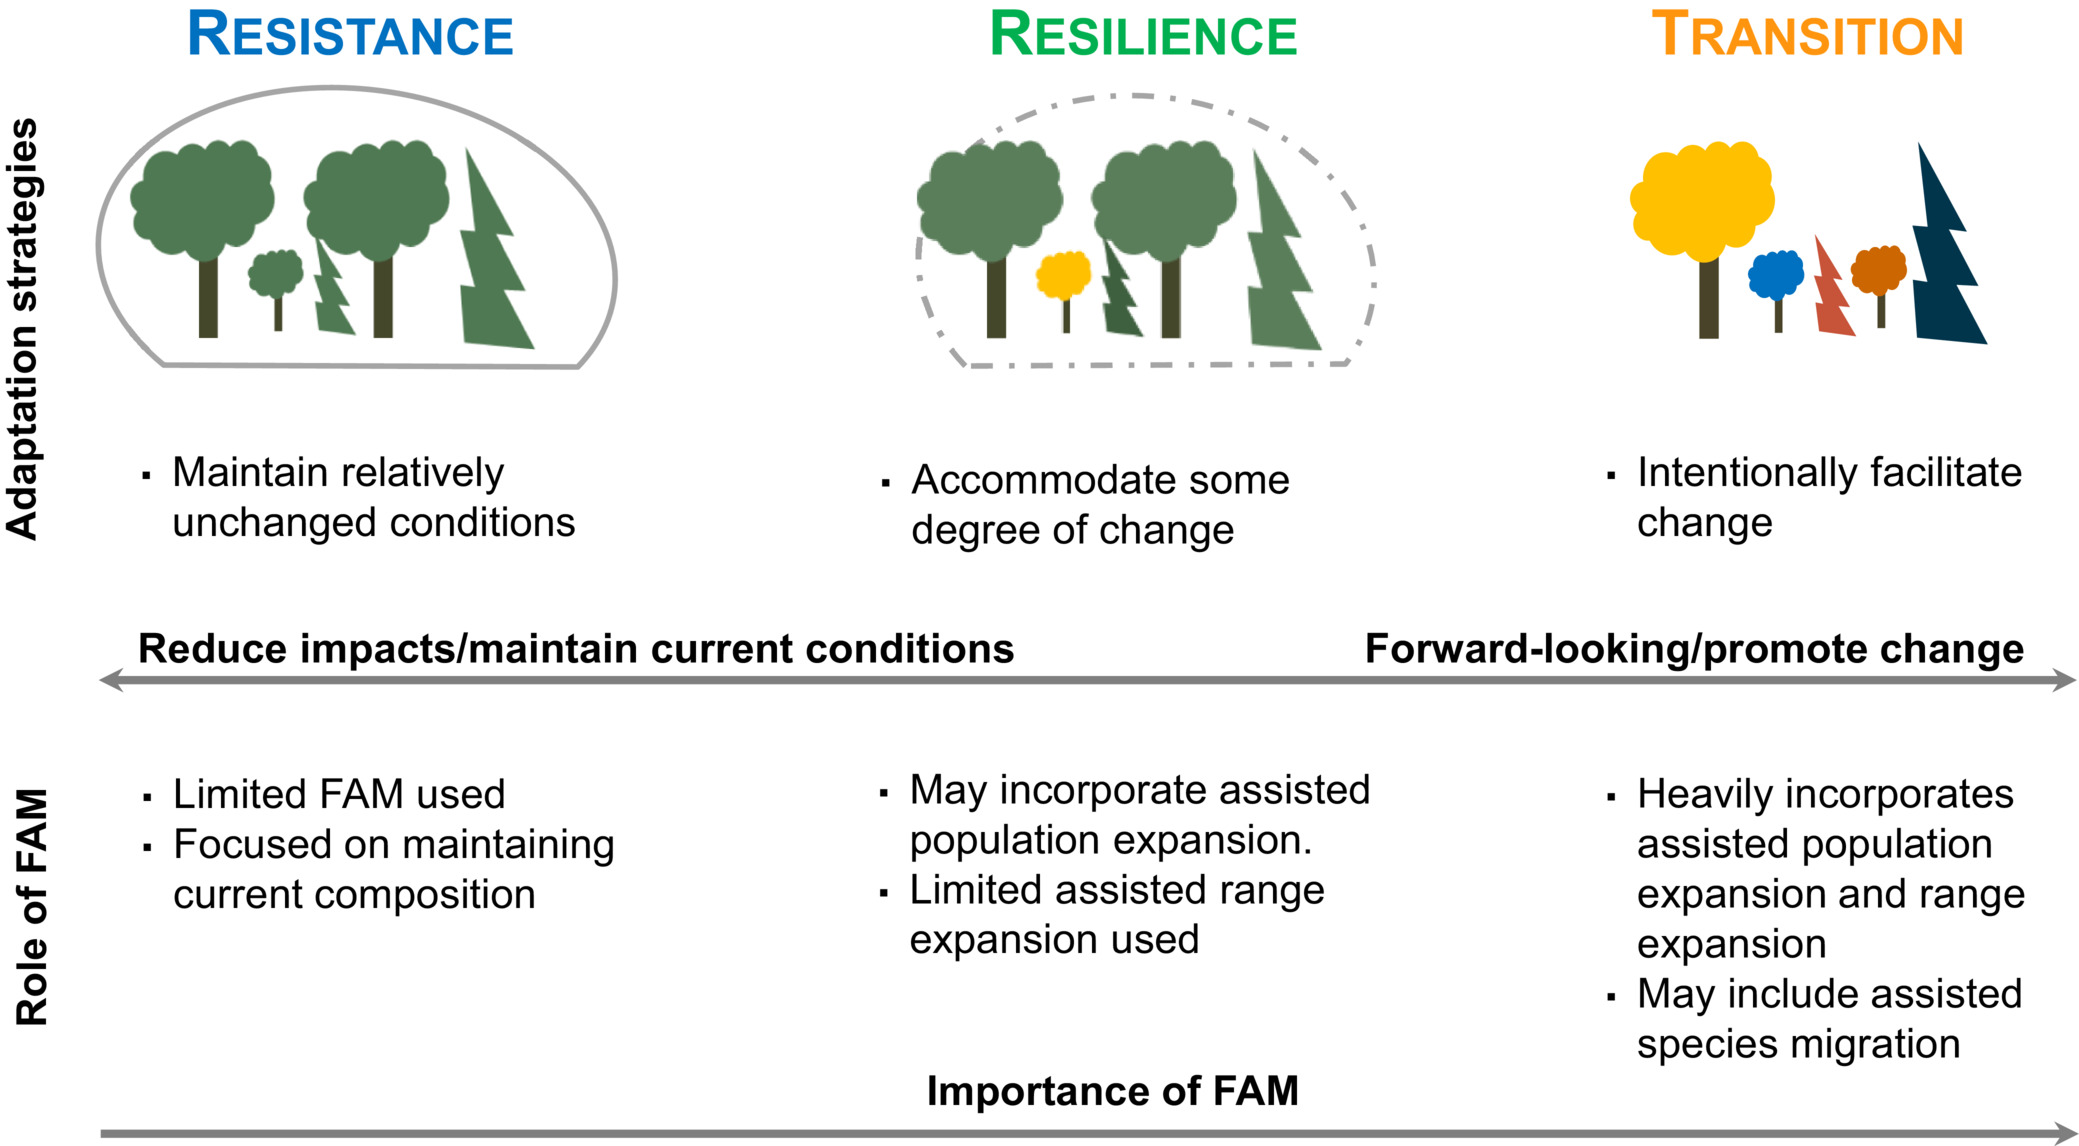 Figure from Palik et al.: Forest-assisted migration (FAM) as part of climate adaptation strategies. The role of FAM increases with degree of change in forest conditions. Redrawn and adapted from Millar et al. (2007), Swanston et al. (2016), and Nagel et al. (2017).